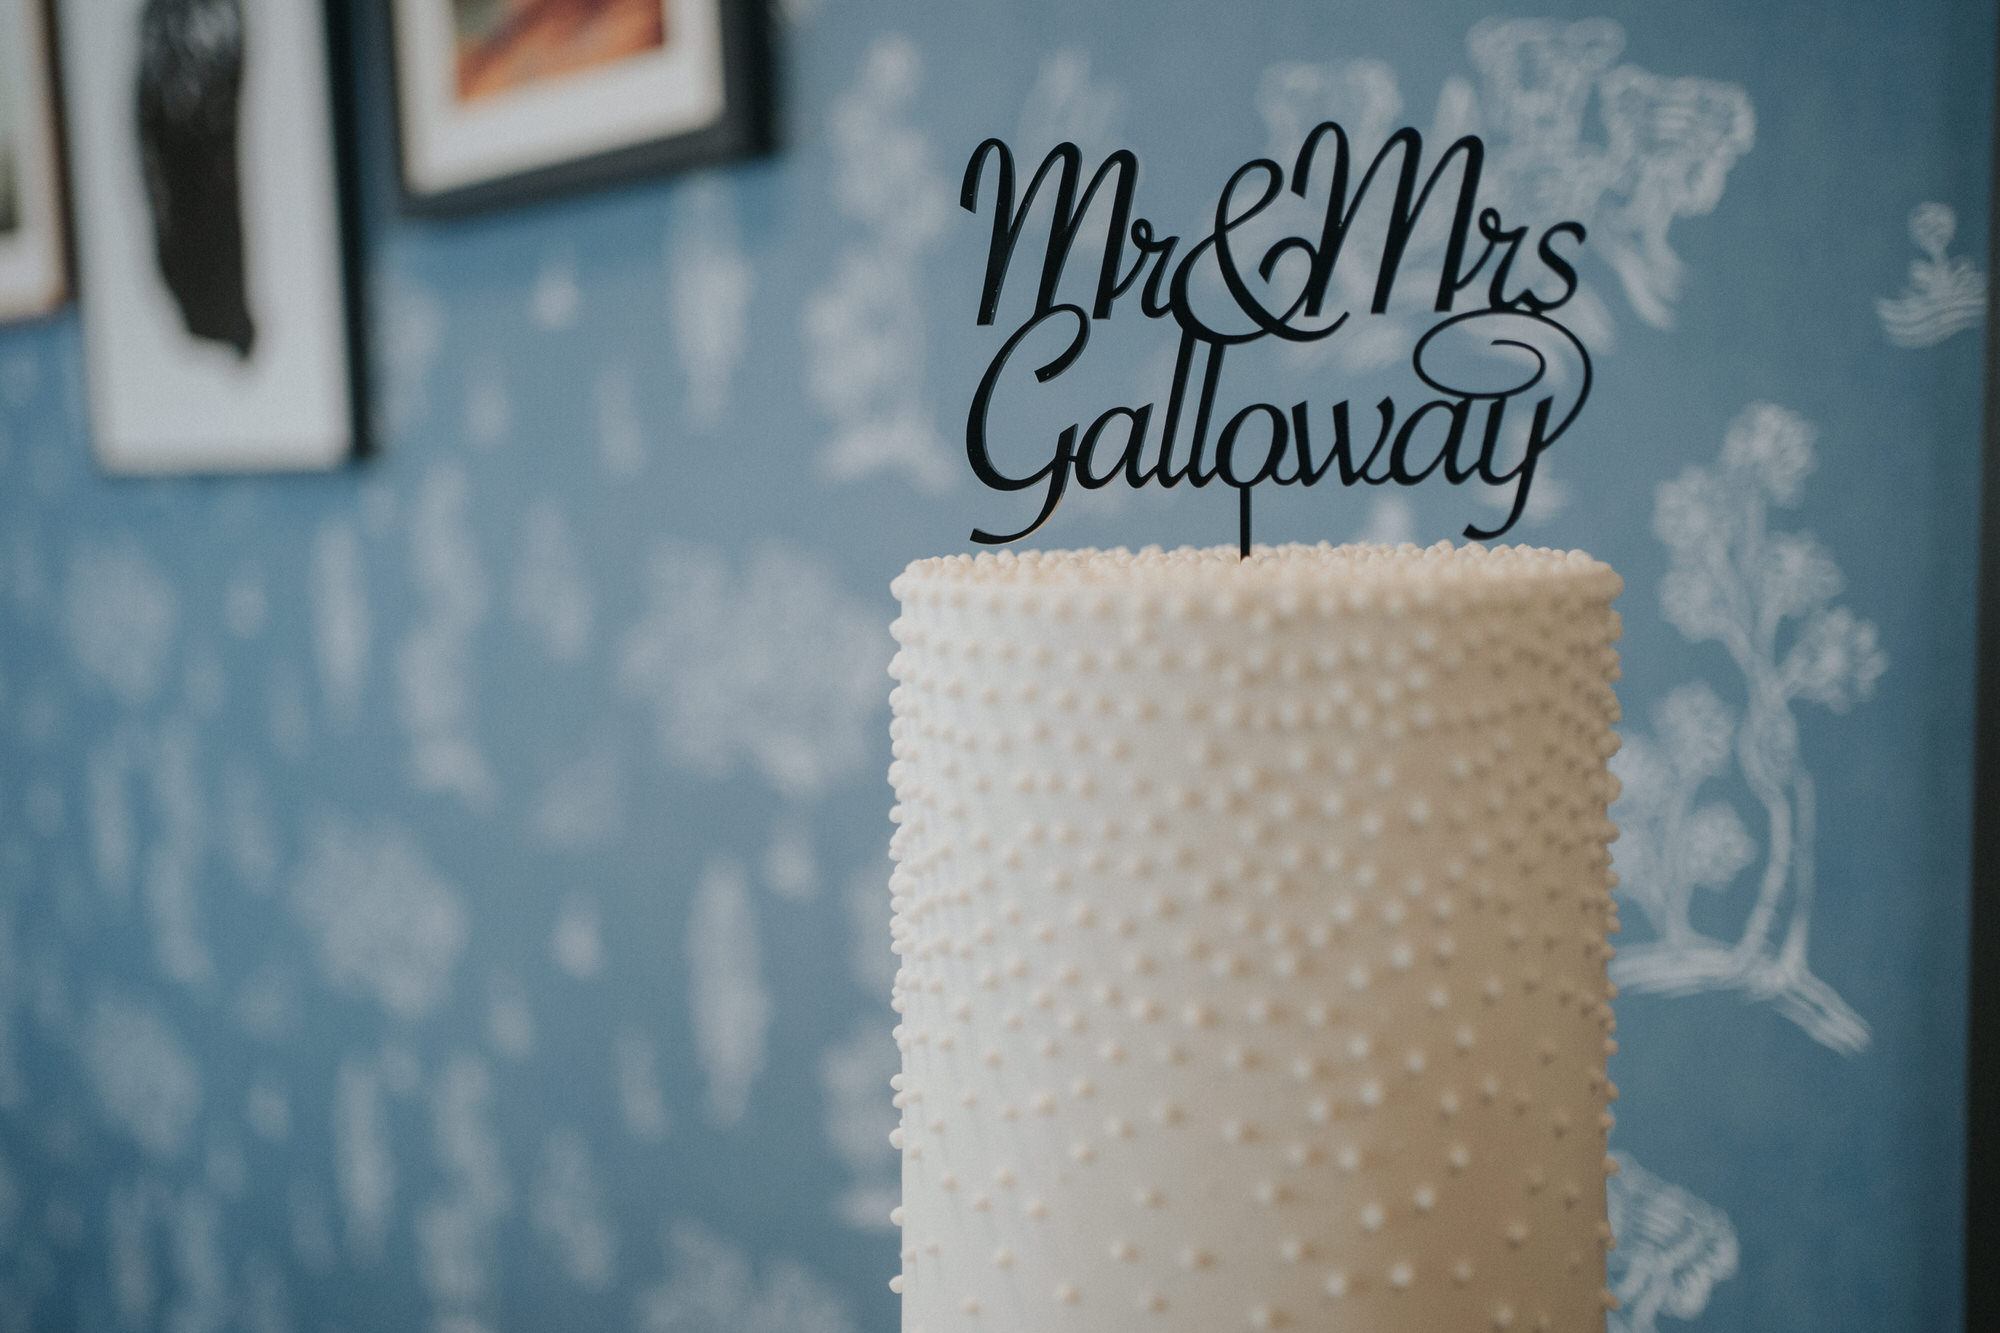 A cake topper that says Mr & Mrs Galloway